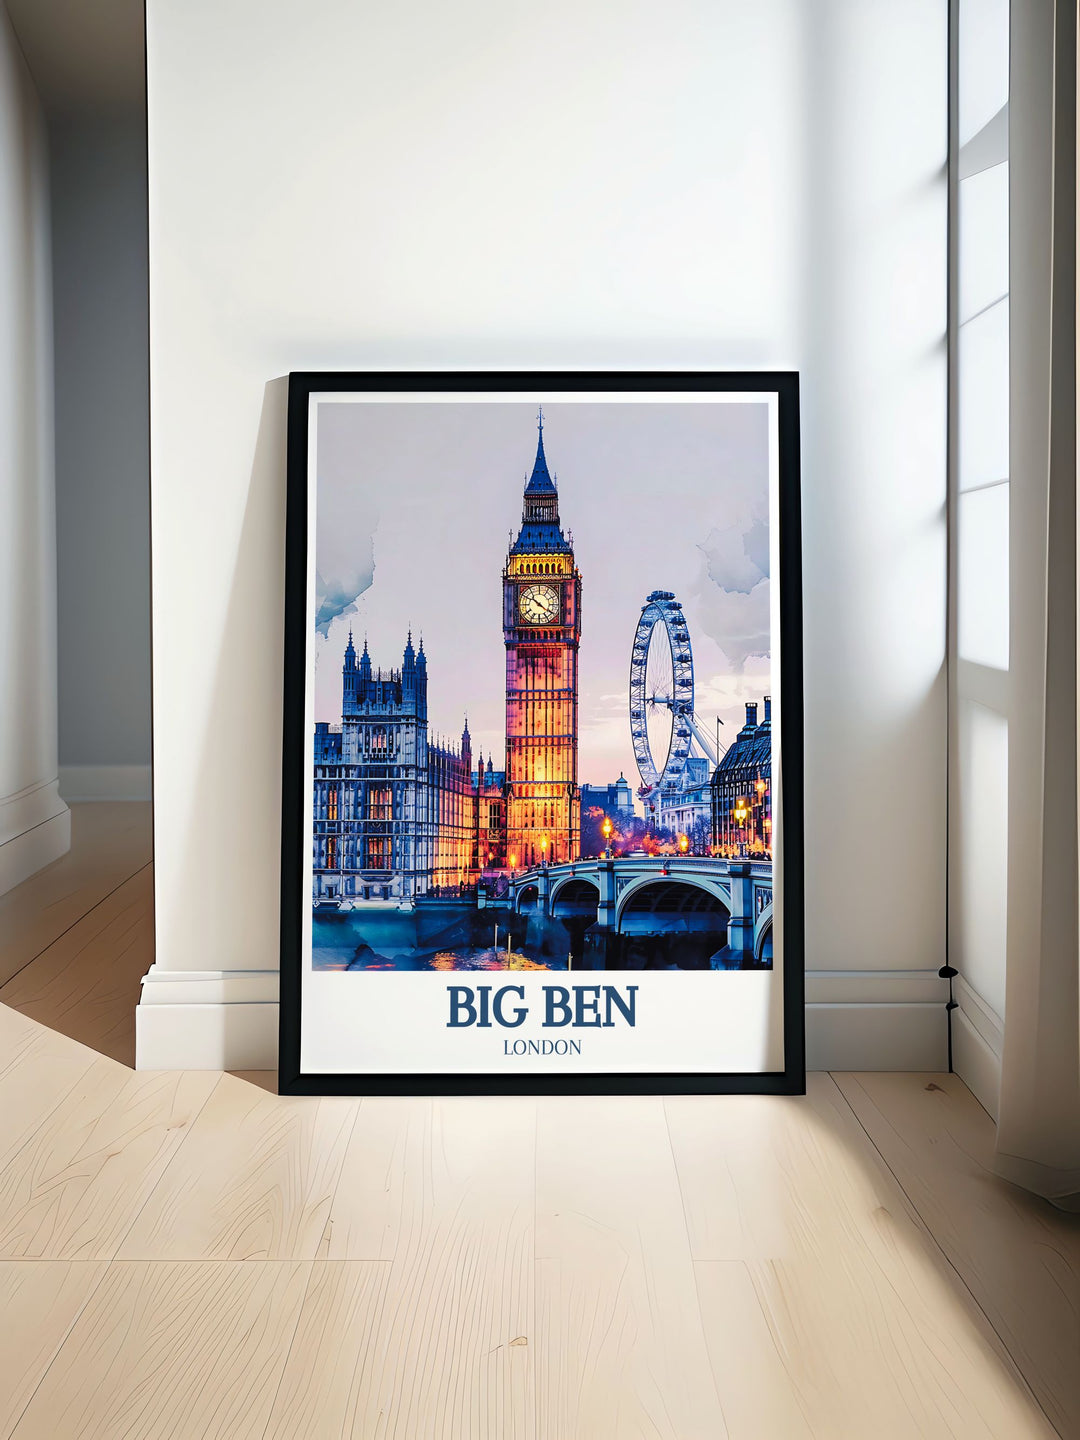 Captivating Big Ben poster featuring the iconic London Eye and the historic Houses of Parliament, showcasing Londons timeless beauty and charm. Perfect for adding a touch of historic elegance to your home decor.